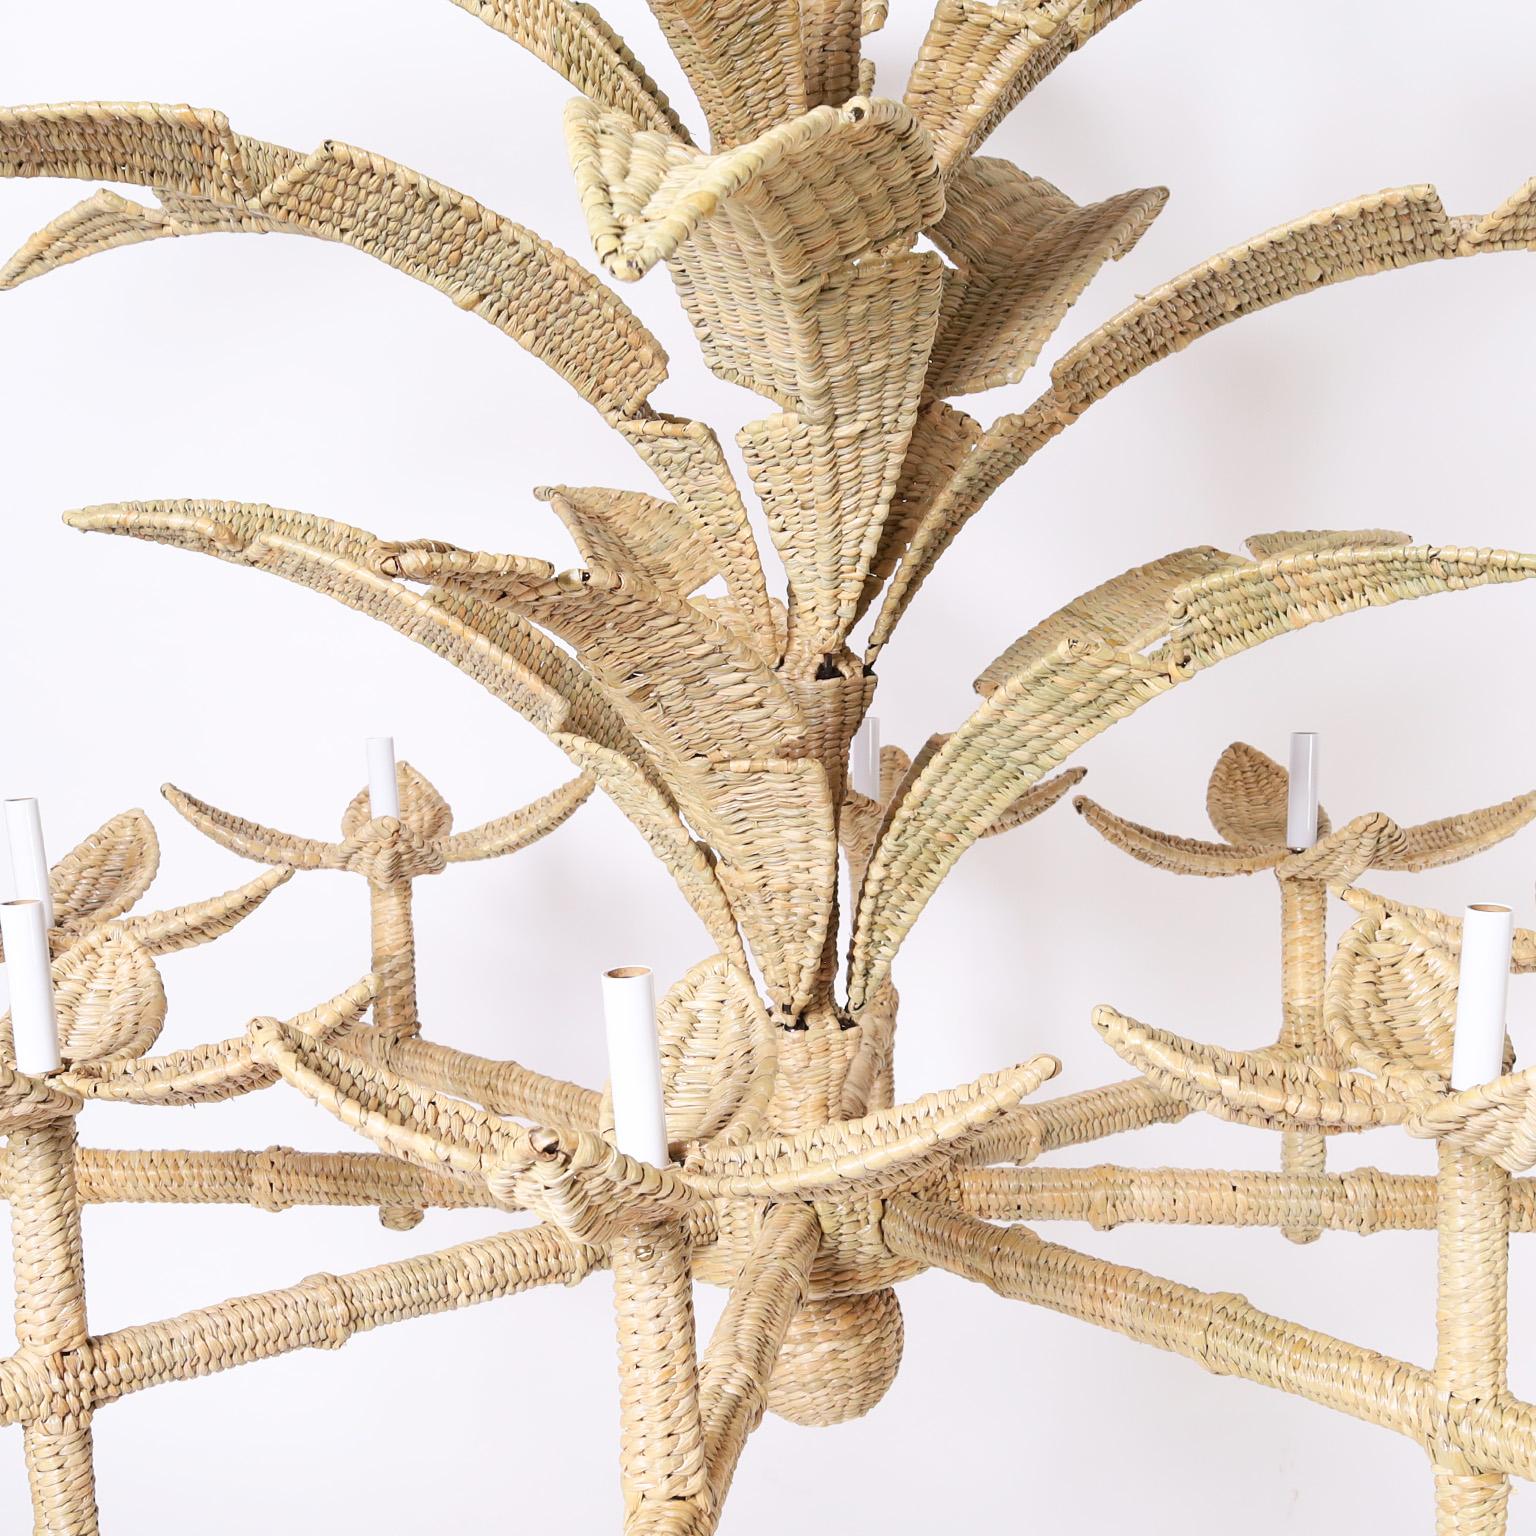 Mexican Florencia Large Wicker Palm Leaf Chandelier from the FS Flores Collection For Sale